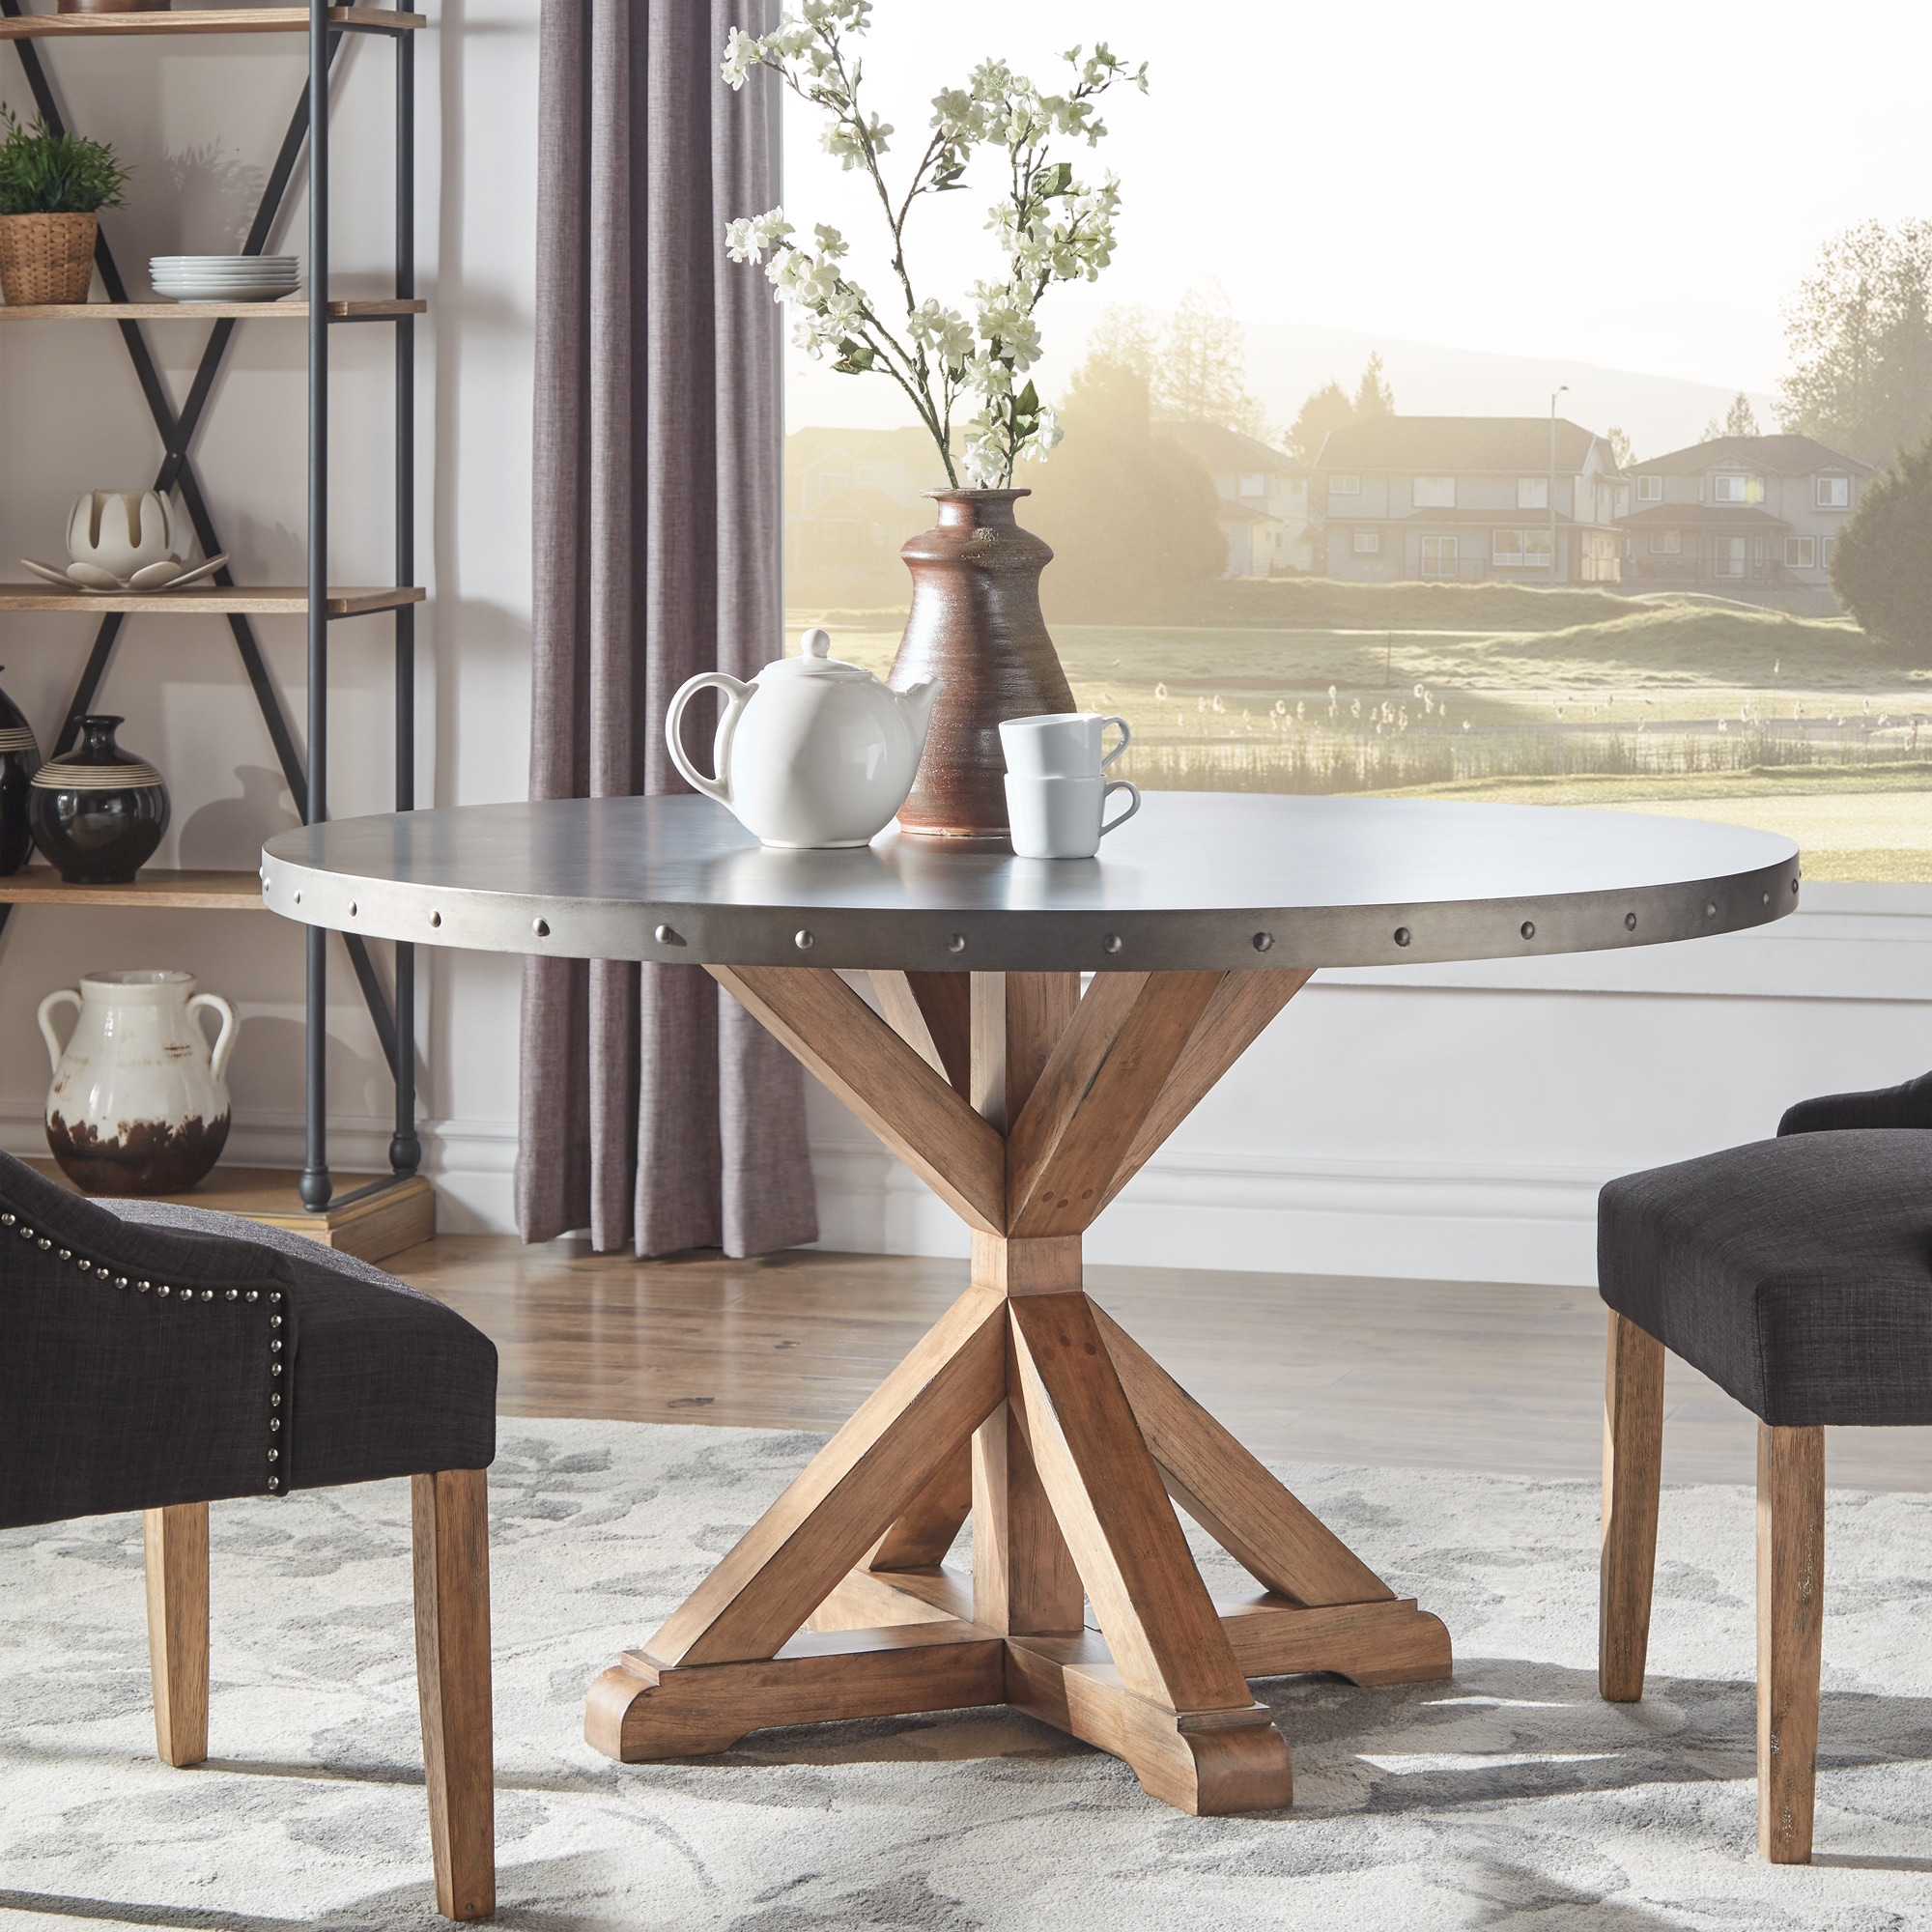 Shop Black Friday Deals On Albee Round Stainless Steel Top Dining Table With Poplar X Base By Inspire Q Artisan Round Stainless Steel Dining Table On Sale Overstock 25443782